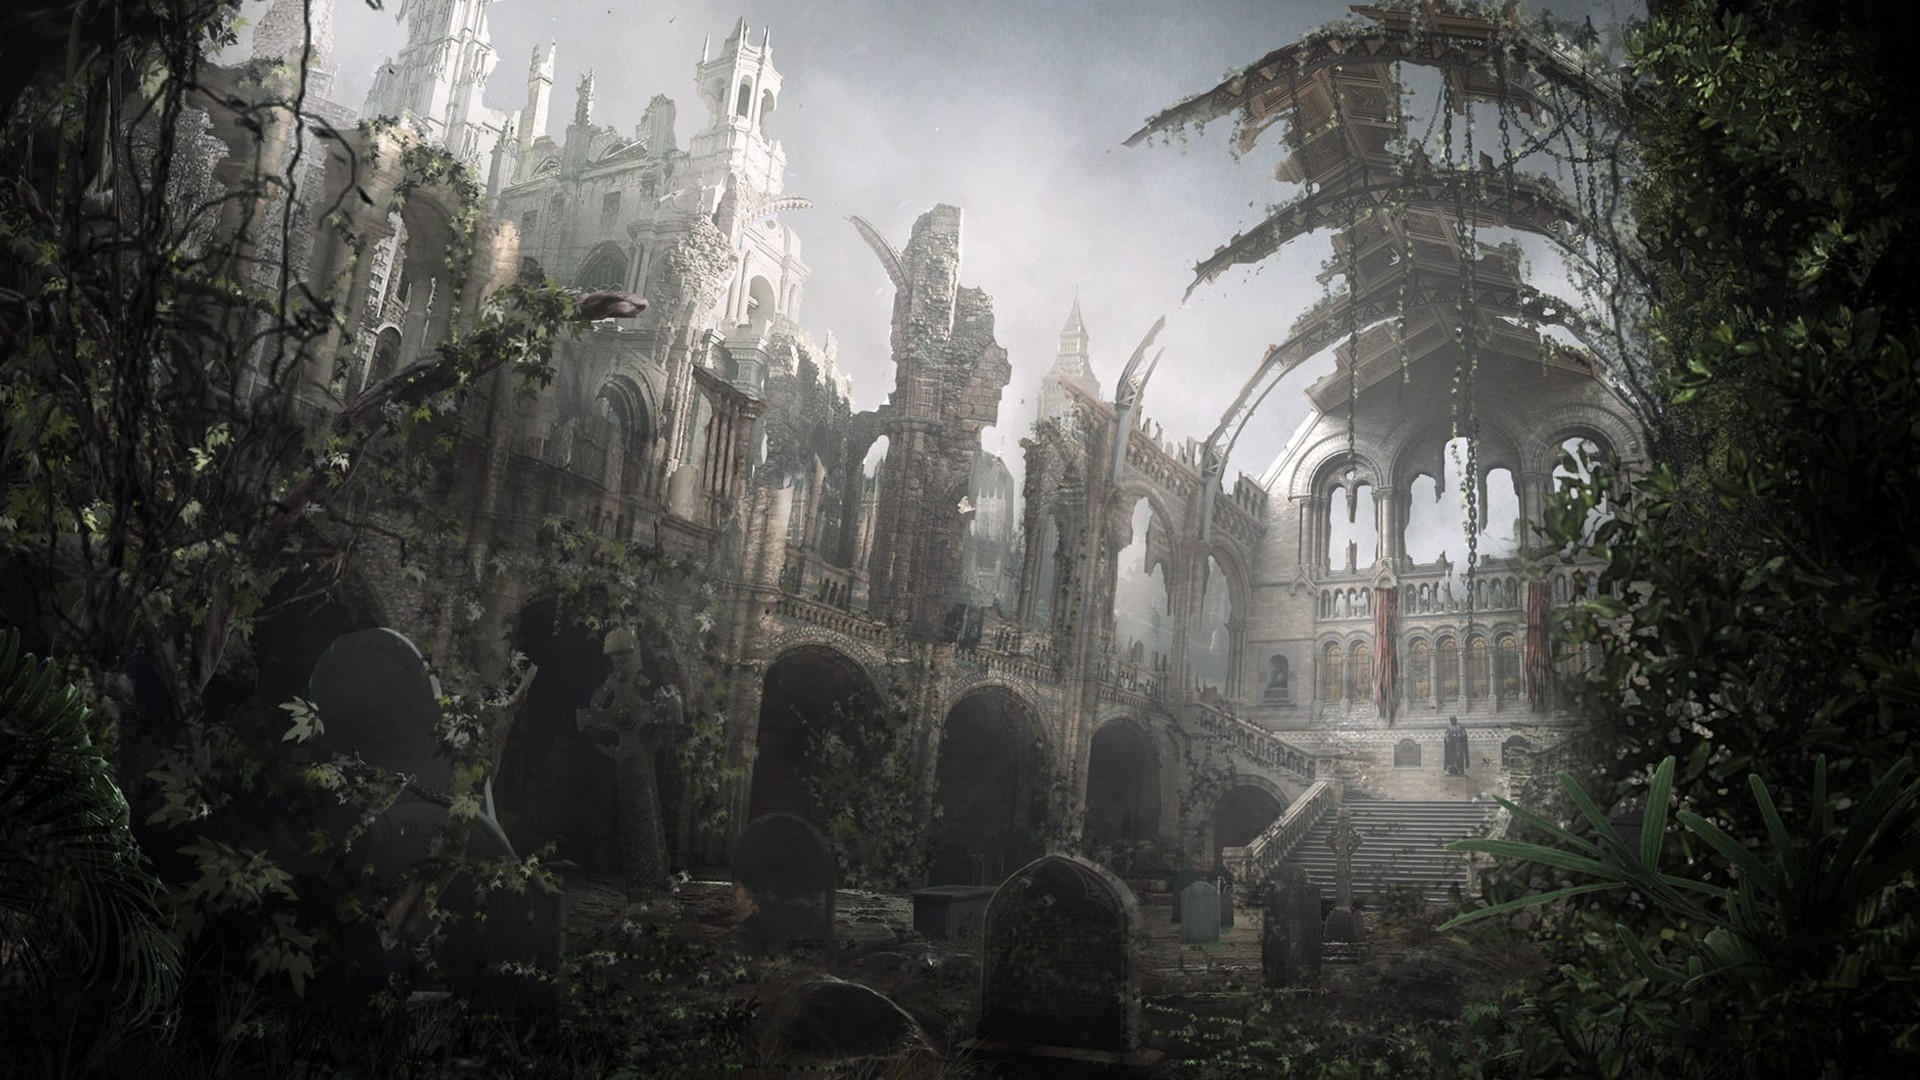 Weekly Wallpaper Imagine The World S End With These Dystopian Ruins